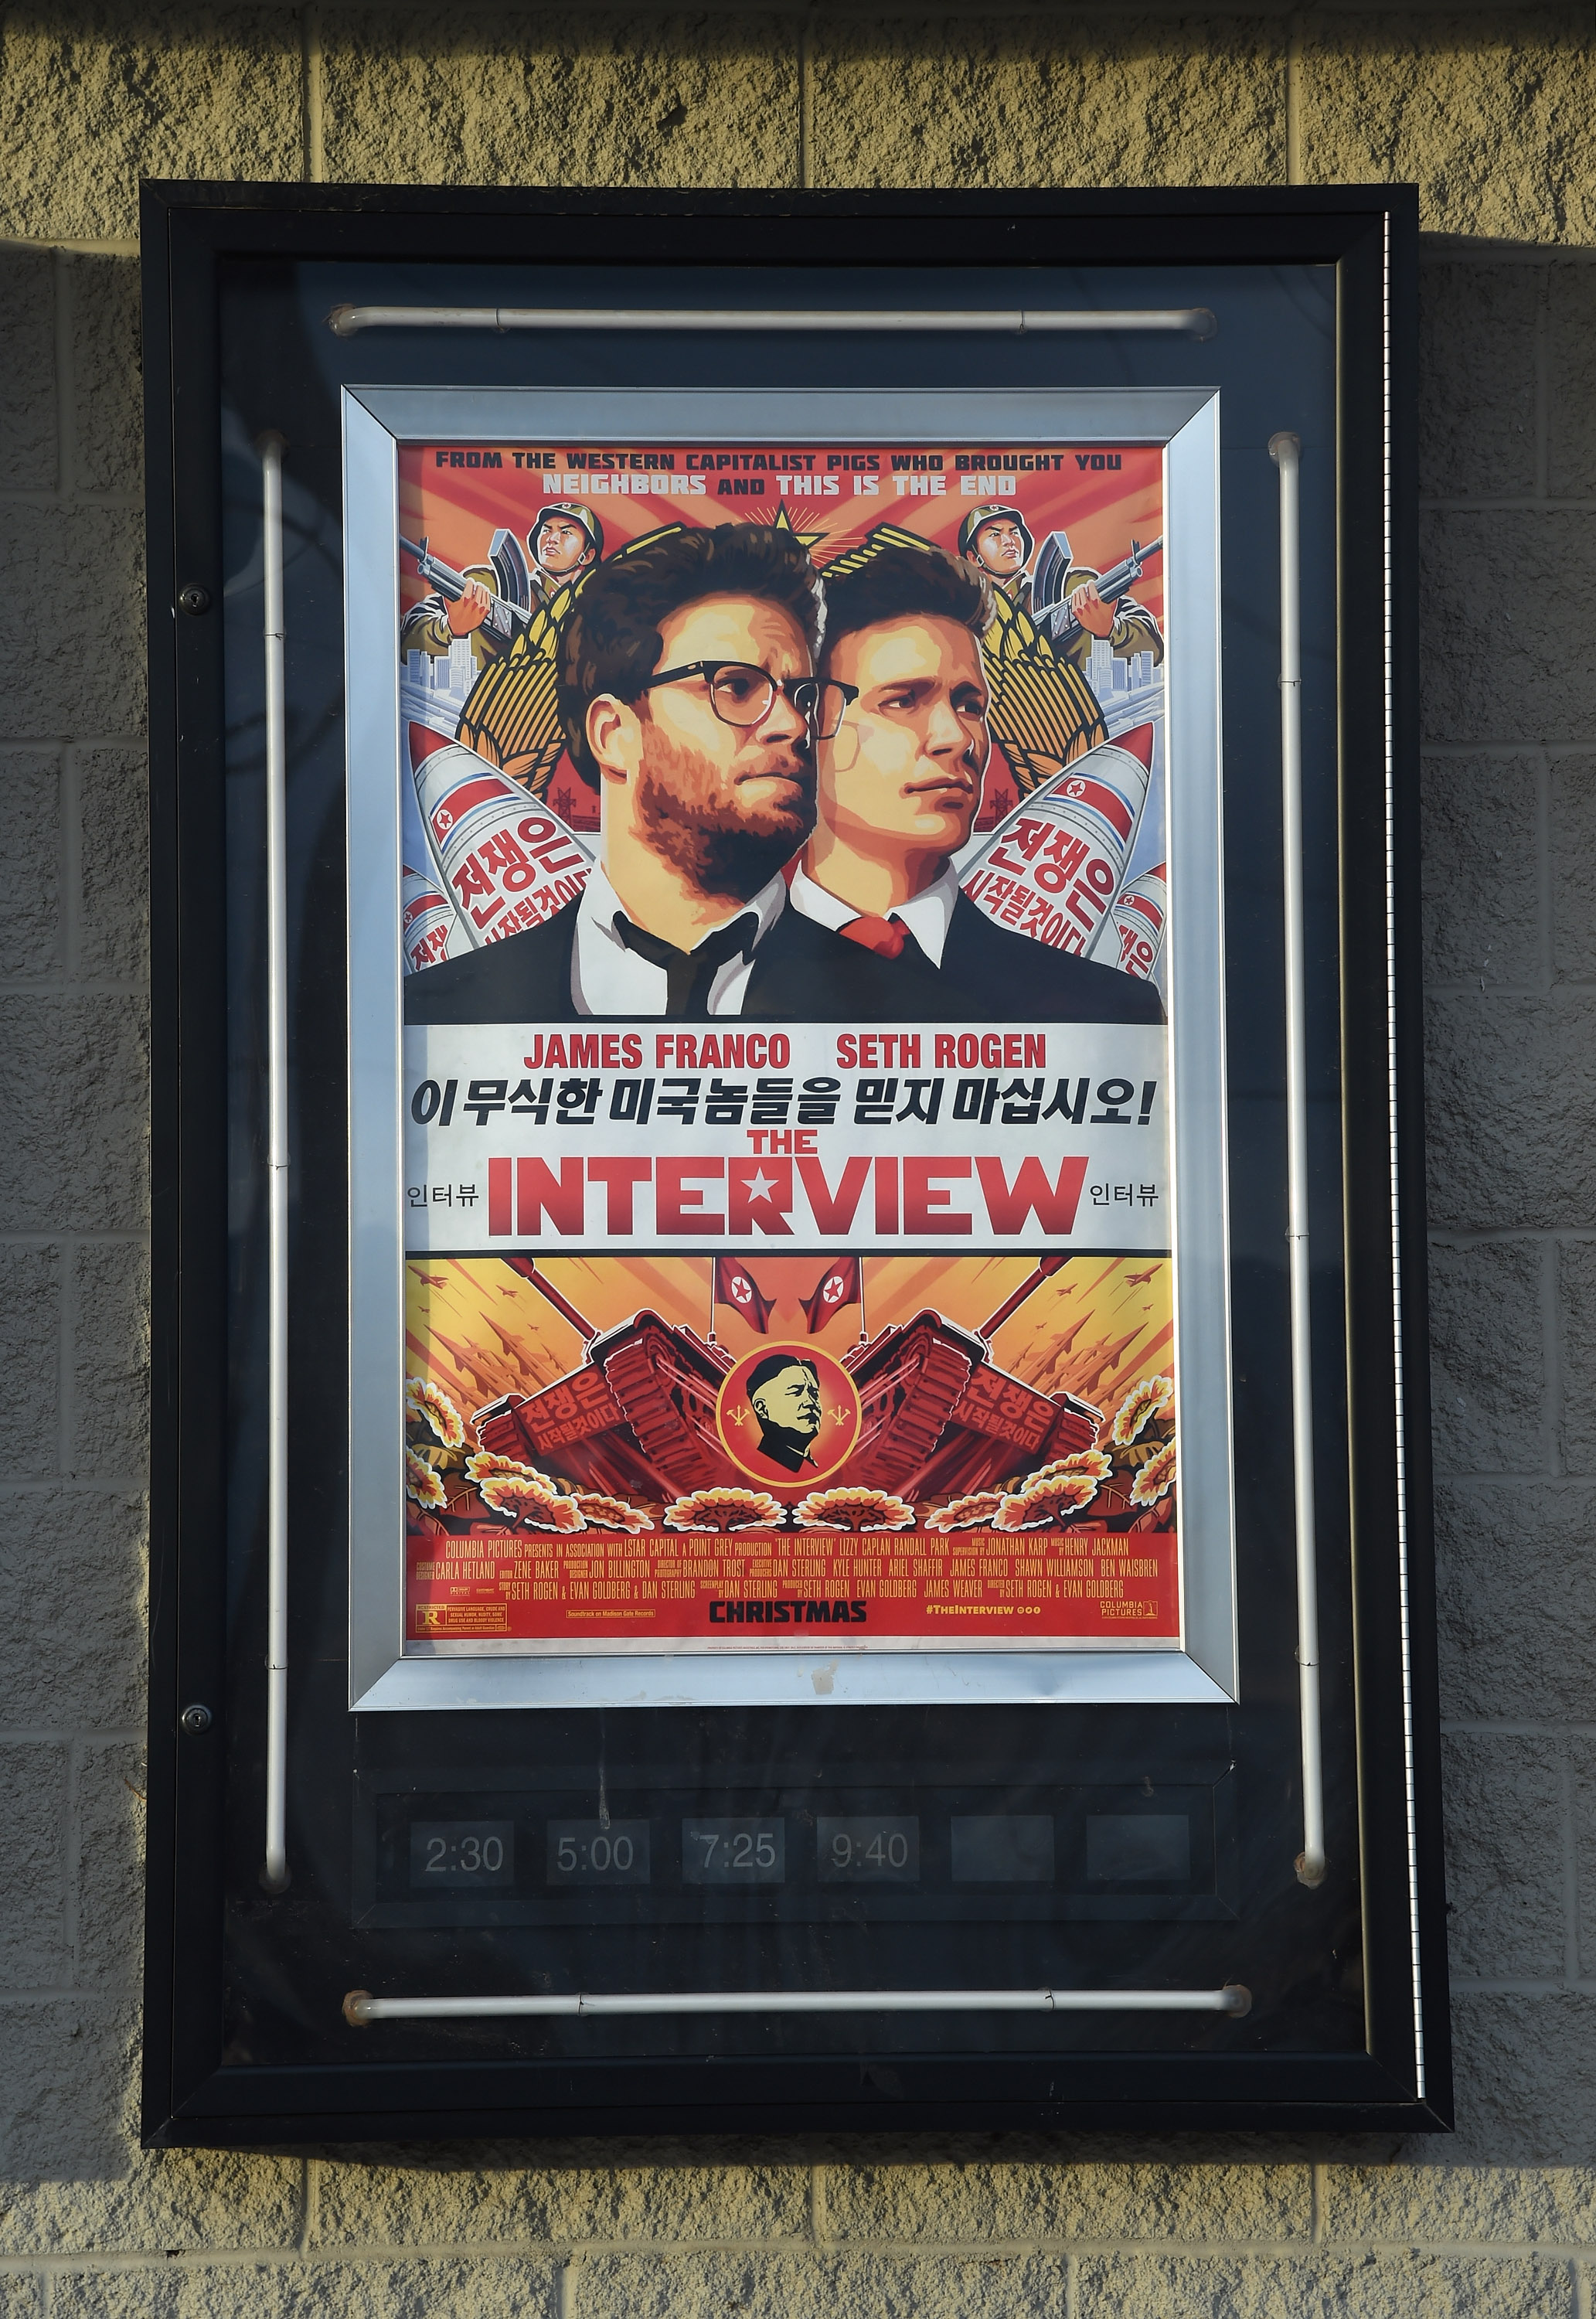 A movie poster for "The Interview" is displayed outside the Megaplex Theatres - Stadium 6 on Dec. 25, 2014 in Mesquite, Nev. (Ethan Miller—Getty Images)